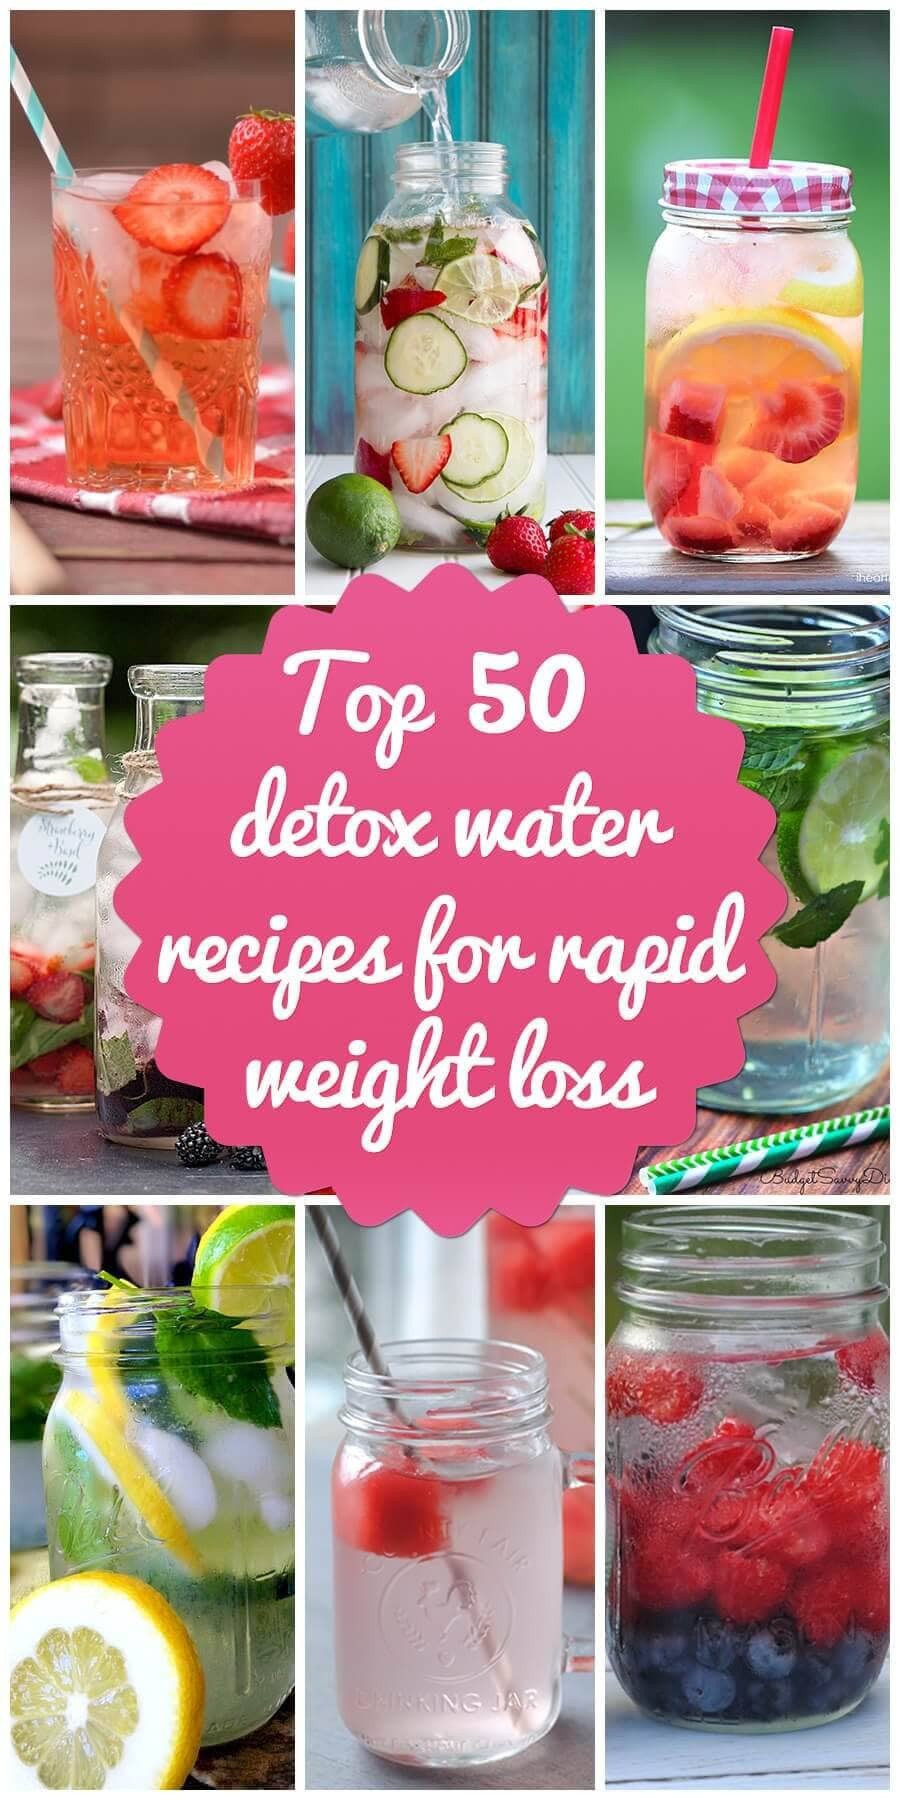 Quick Weight Loss Detox
 Top 50 Detox Water Recipes for Rapid Weight Loss